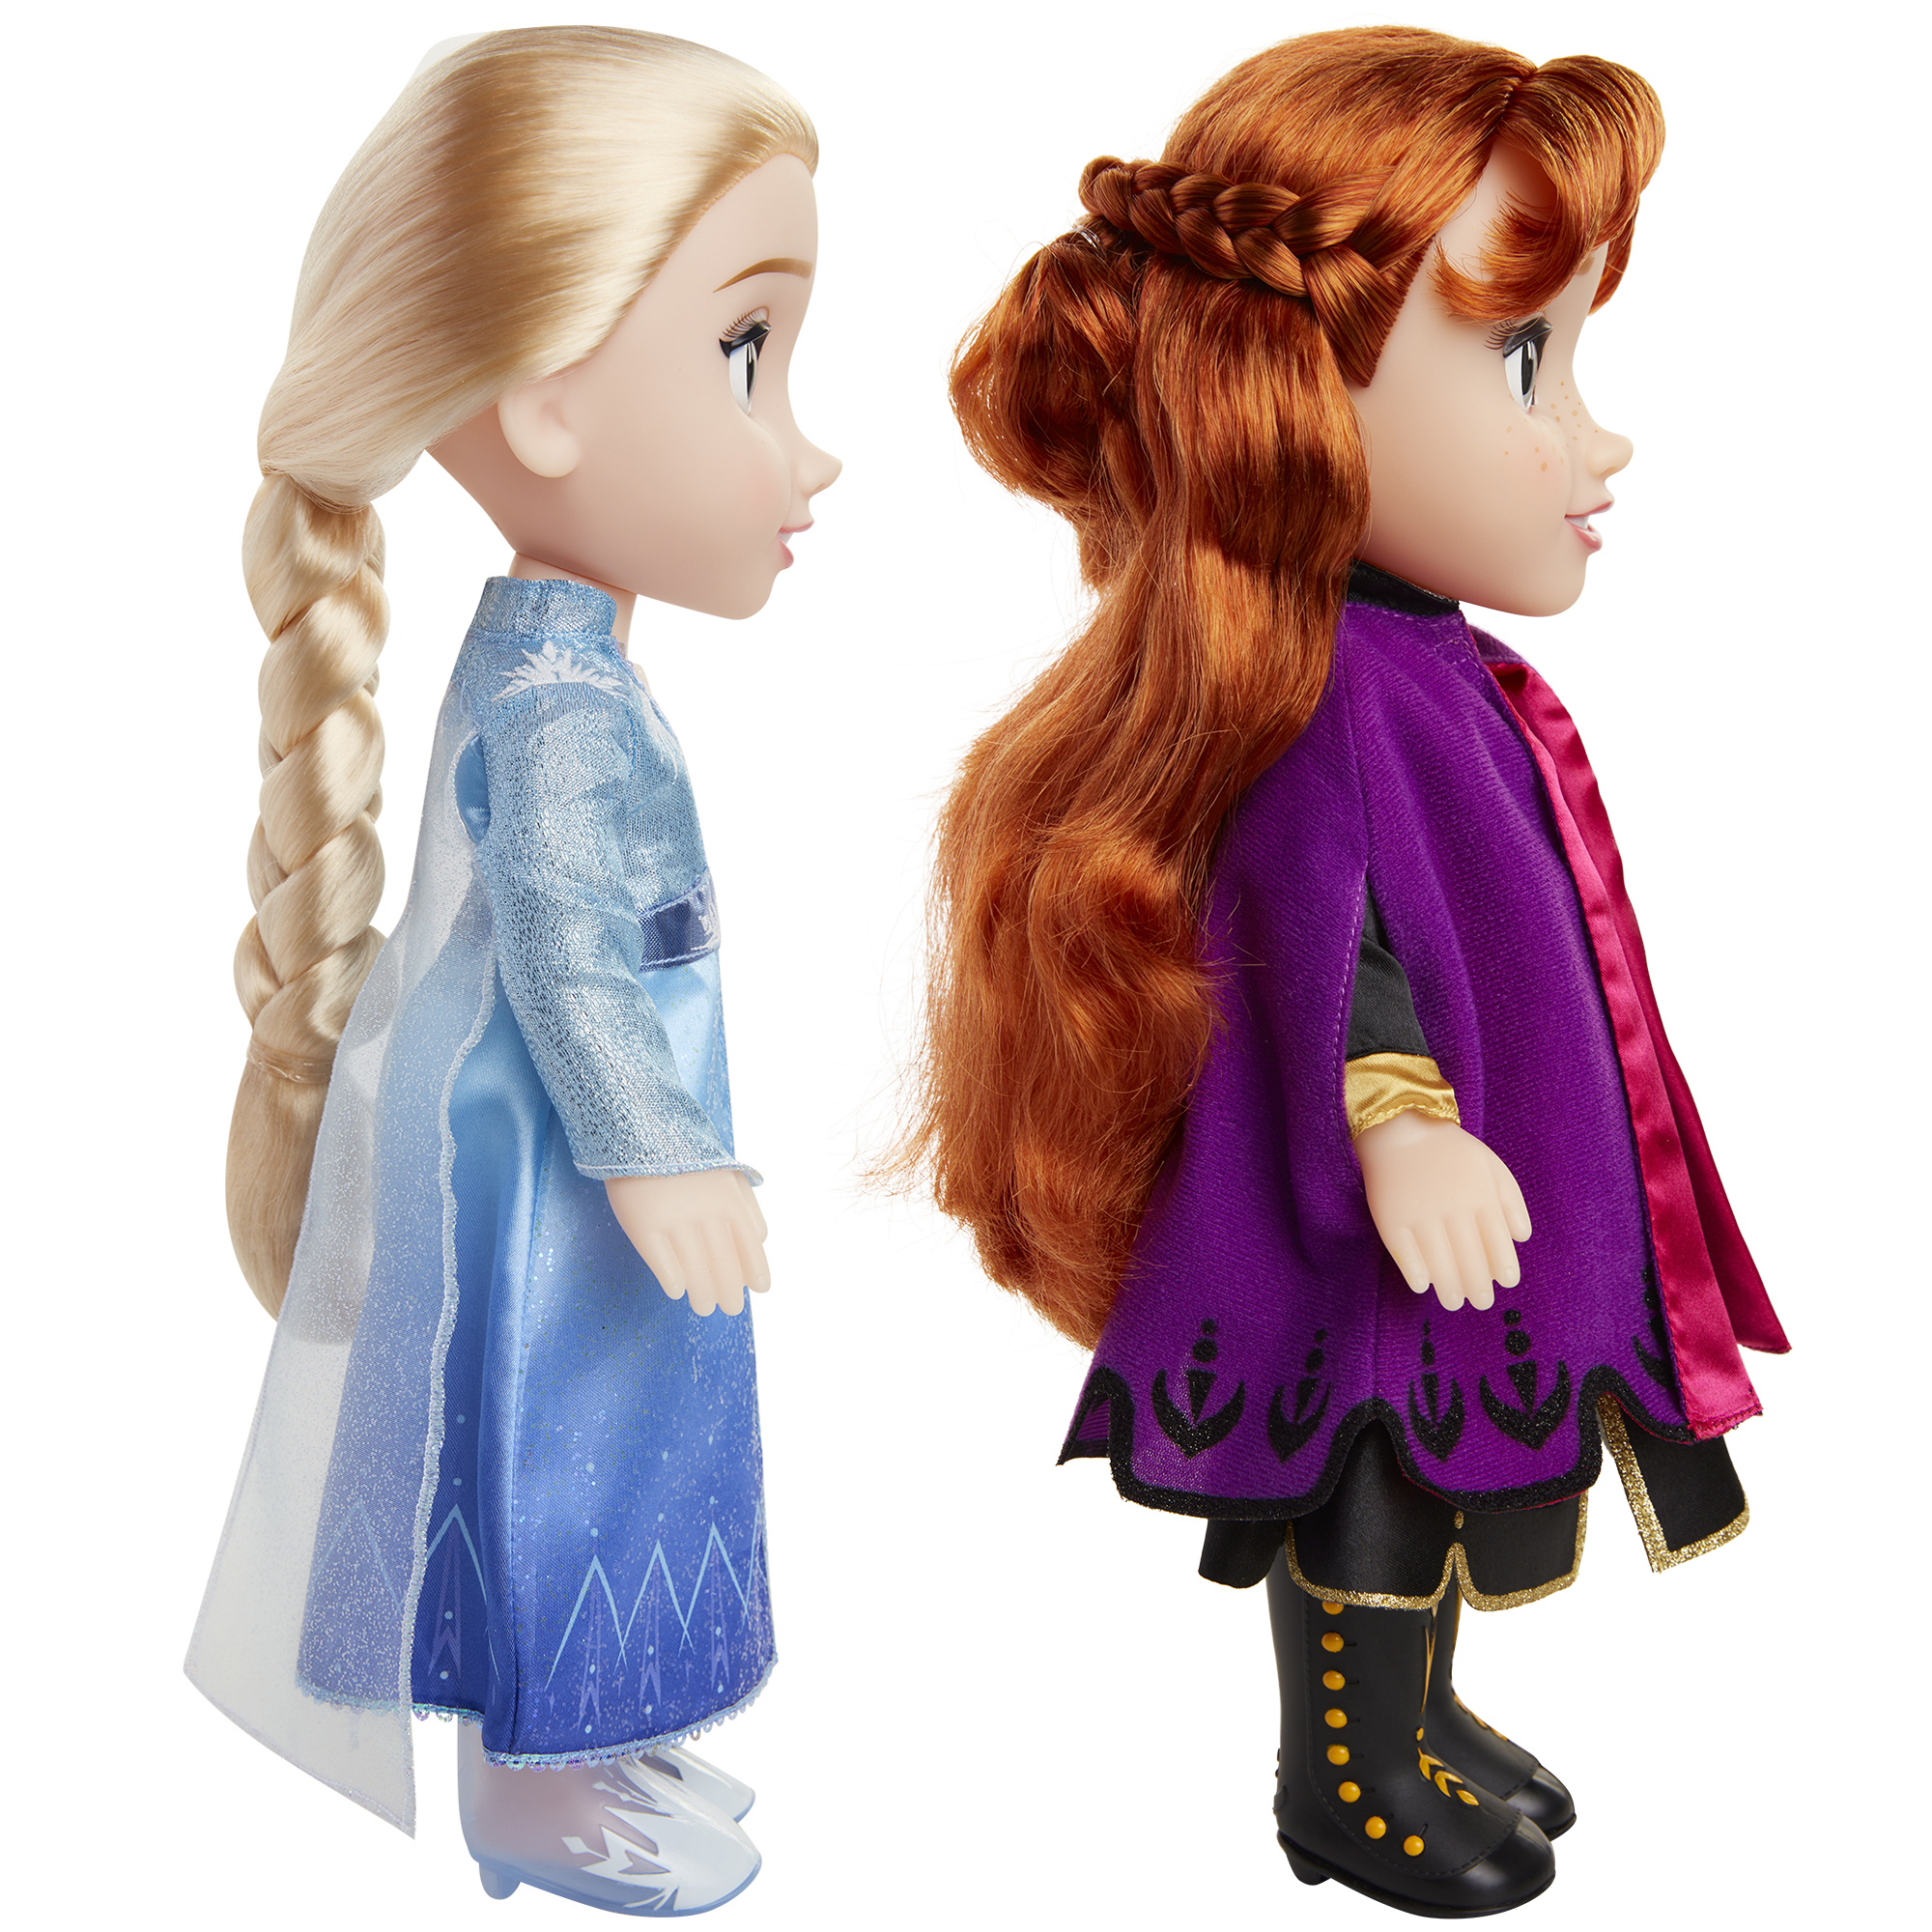 Disney Princess Anna and Elsa 14 Inch Singing Sisters Feature Fashion Doll 2 Pack - image 4 of 12